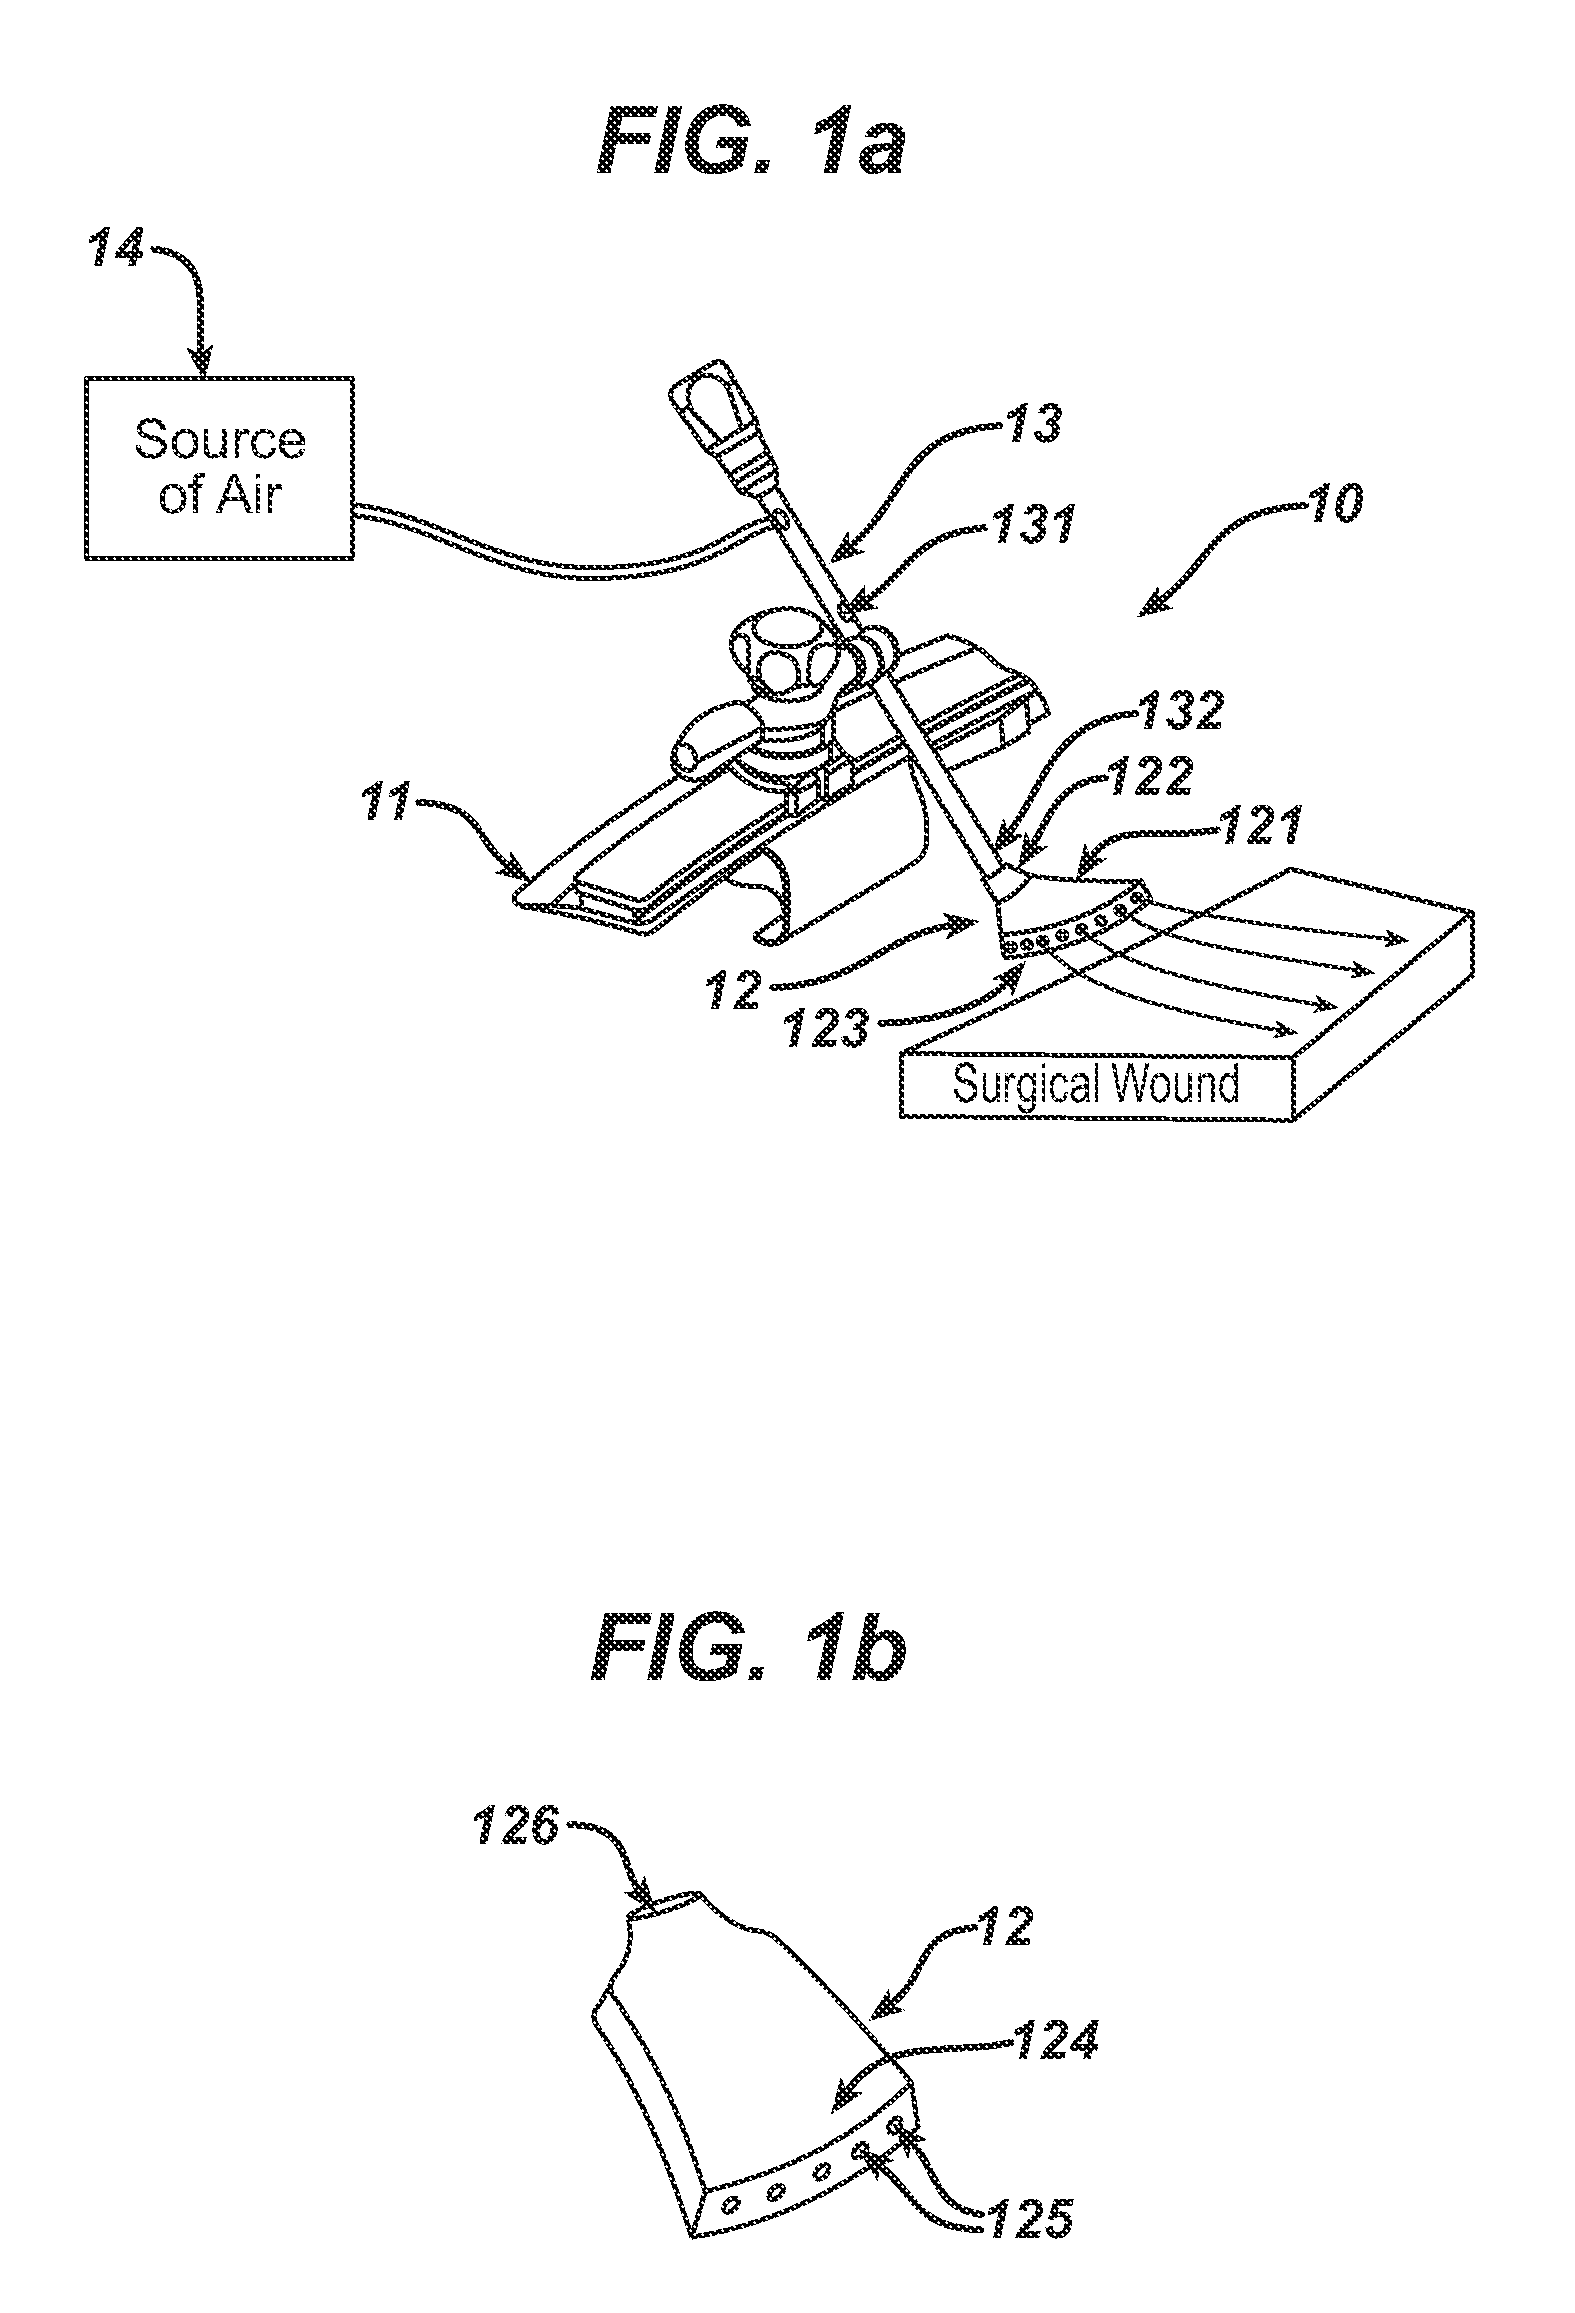 System and method for reducing surgical site infection